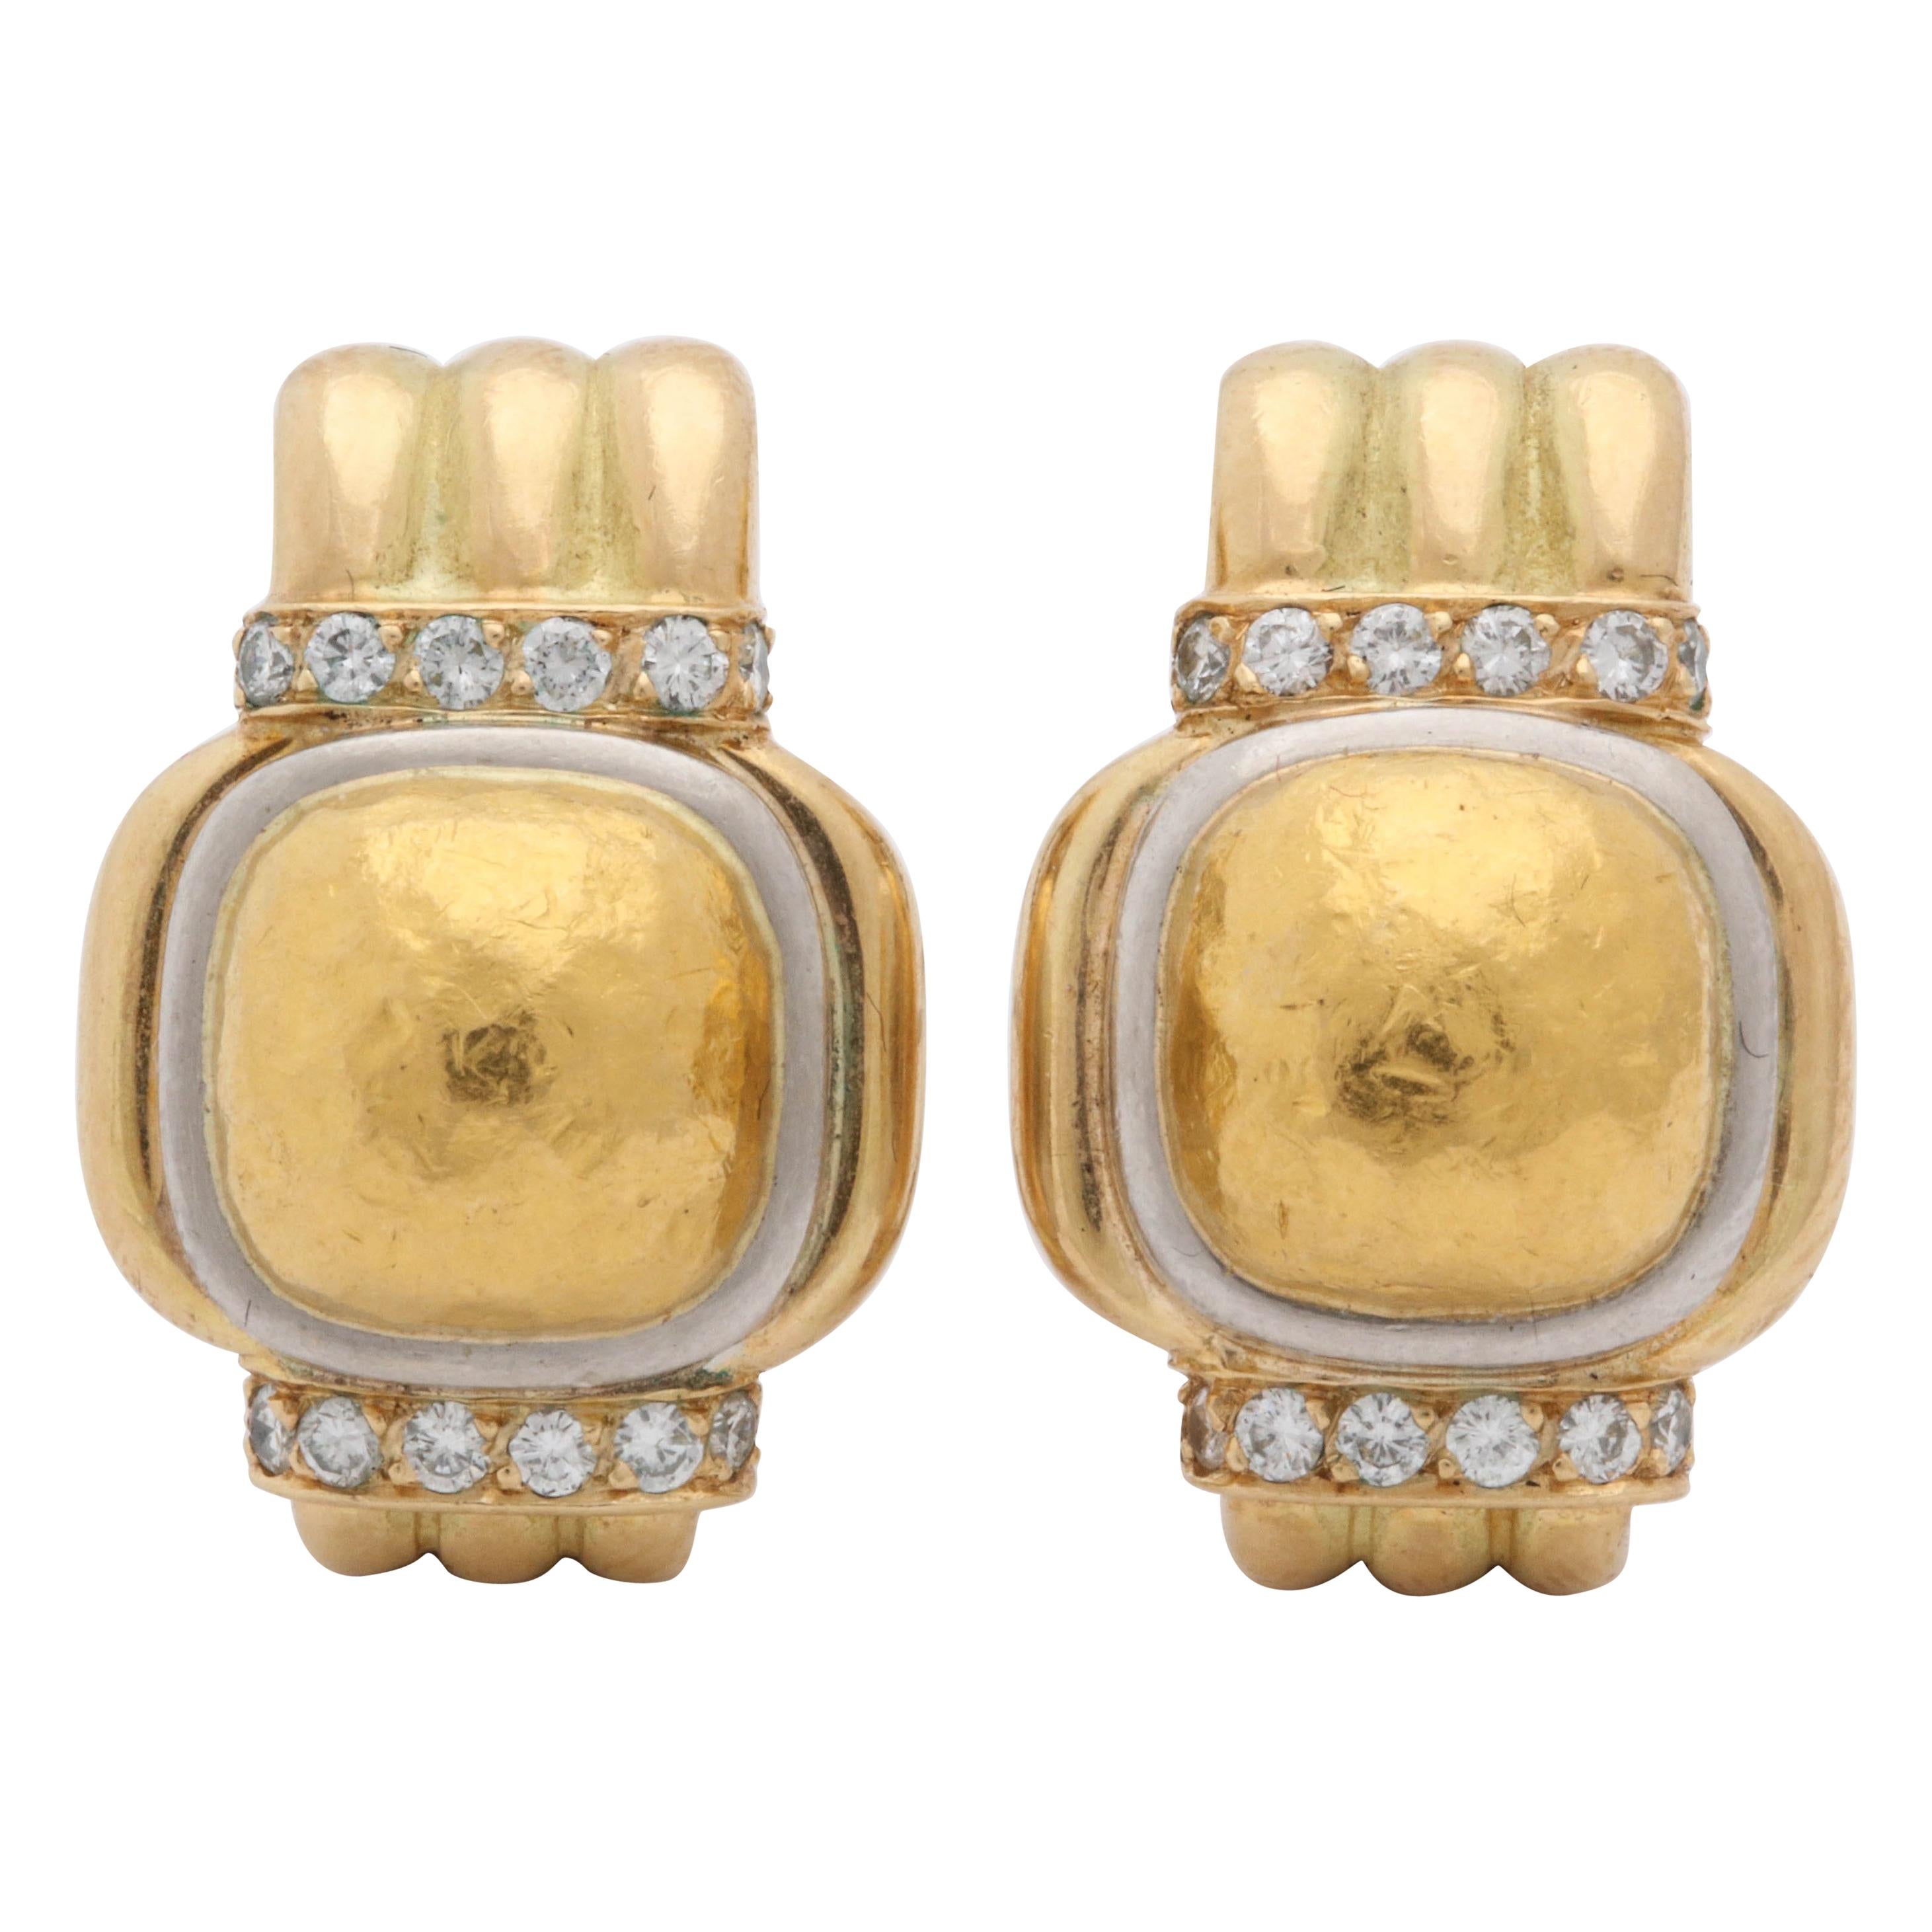 Chaumet Paris Hand-Hammered and High Polish Gold and Diamonds Earclips